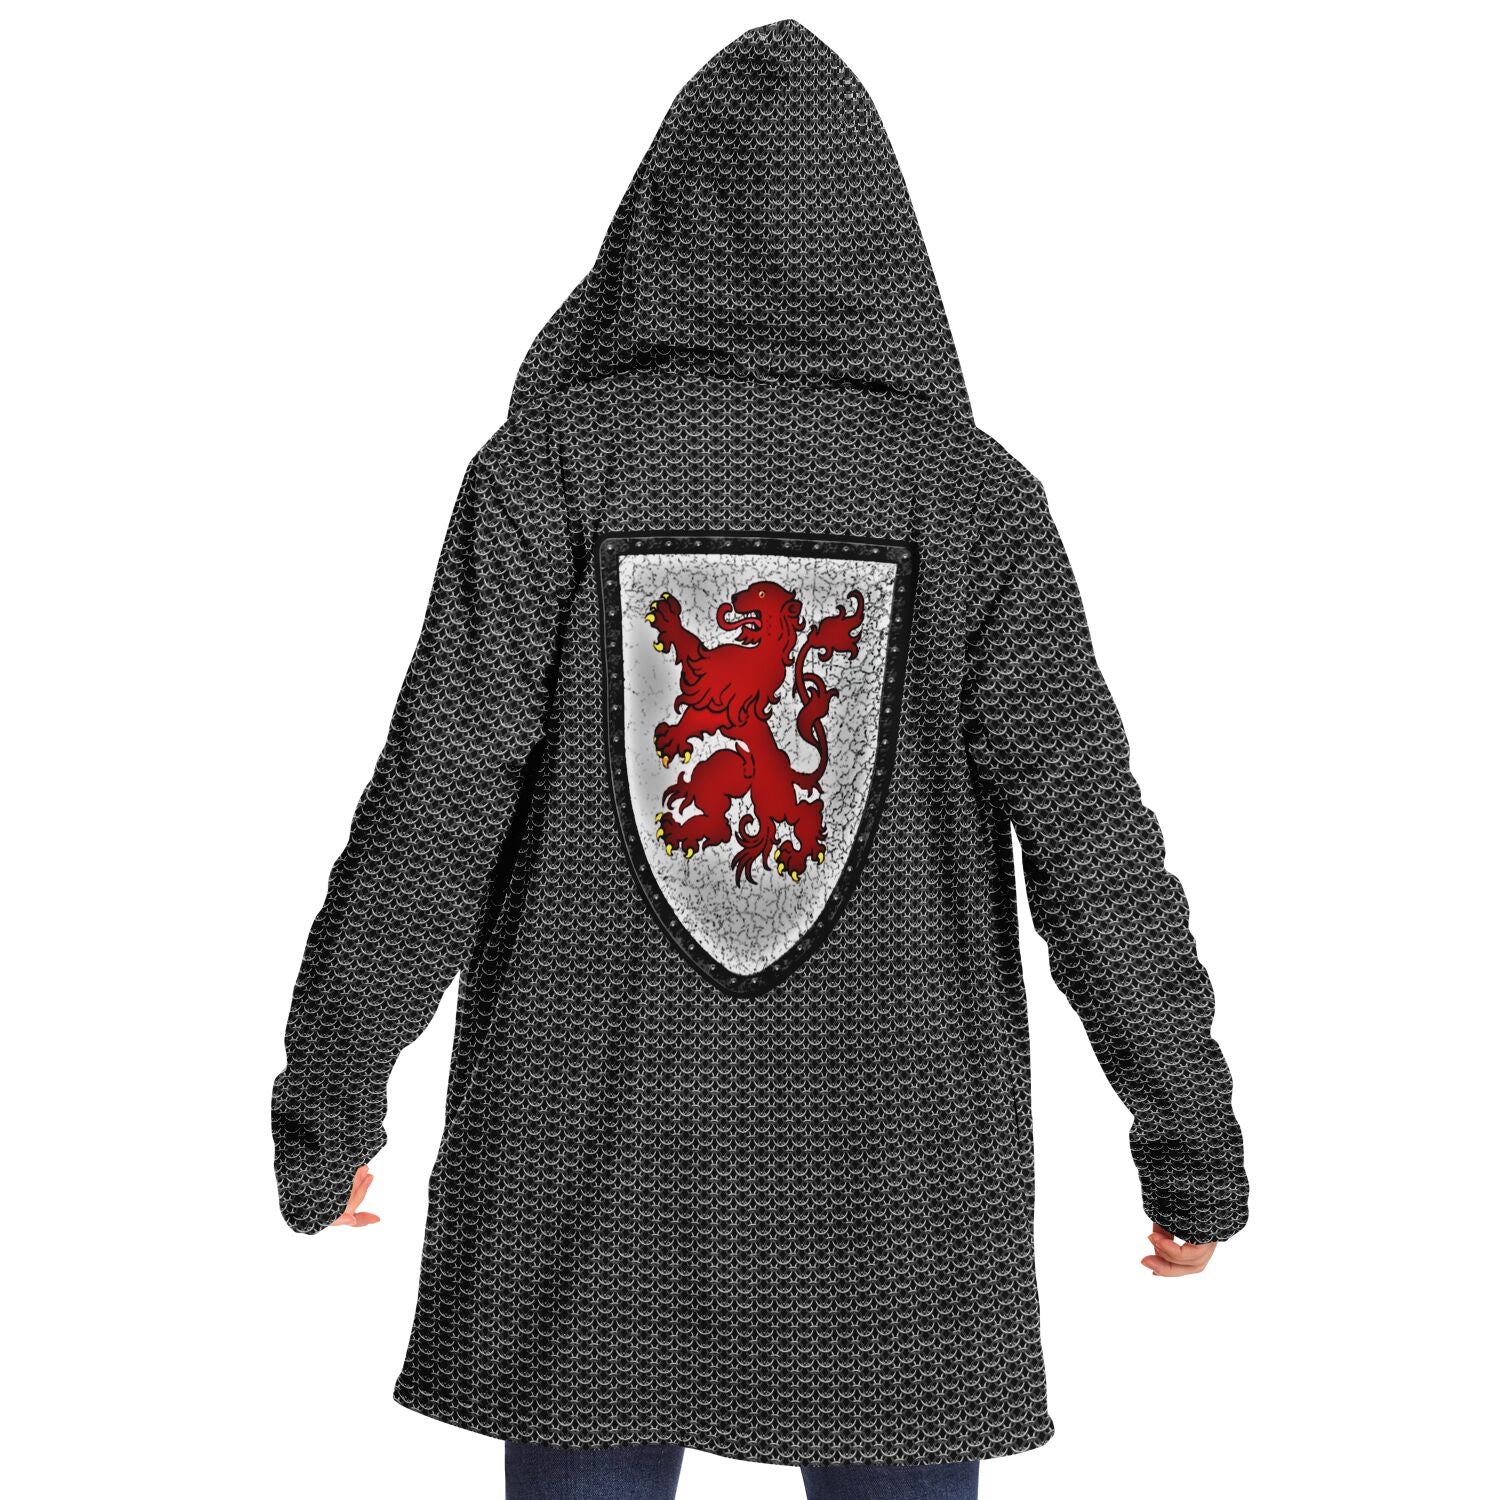 Chain Mail Print Cloak with Lion Crest